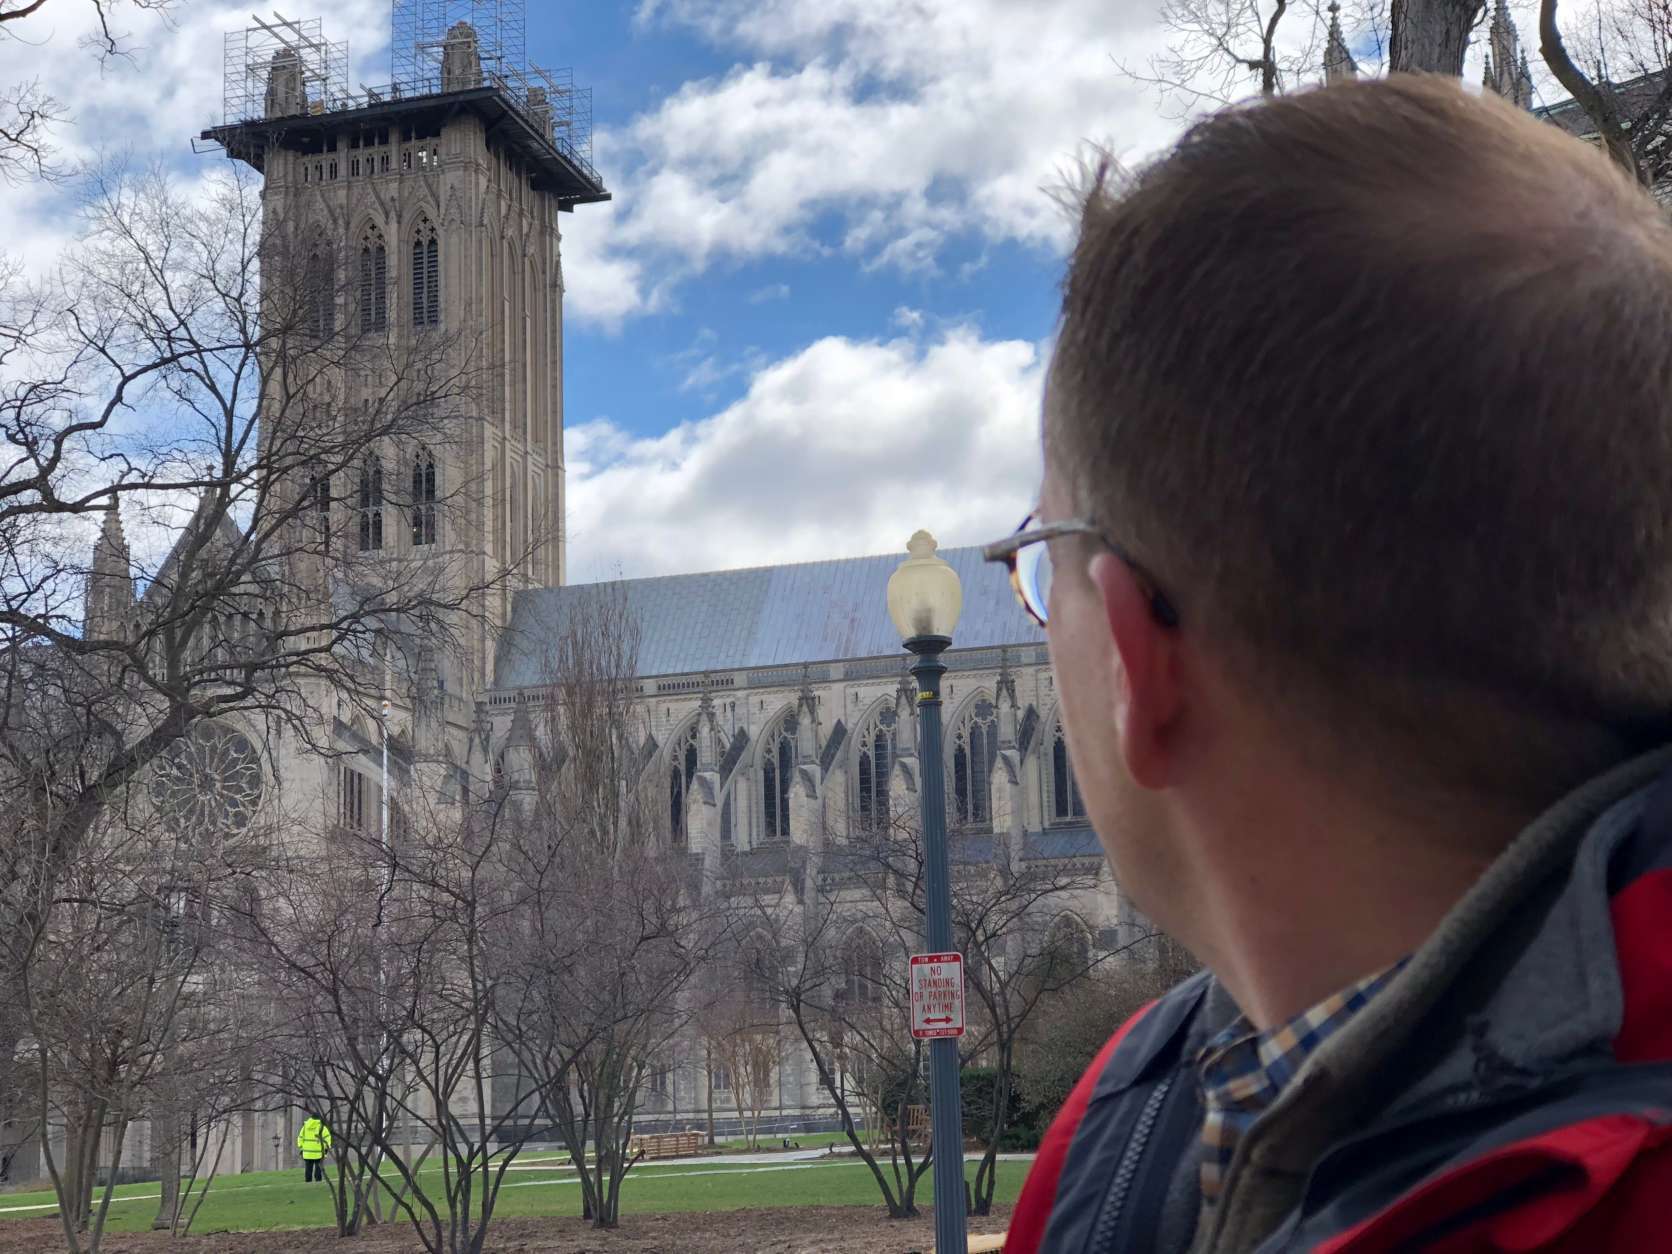 The high winds forced National Cathedral officials to send workers and visitors home, over concerns that it could blow loose scaffolding on the central tower. The tower is still undergoing repairs after the 2011 earthquake. (WTOP/Kate Ryan)